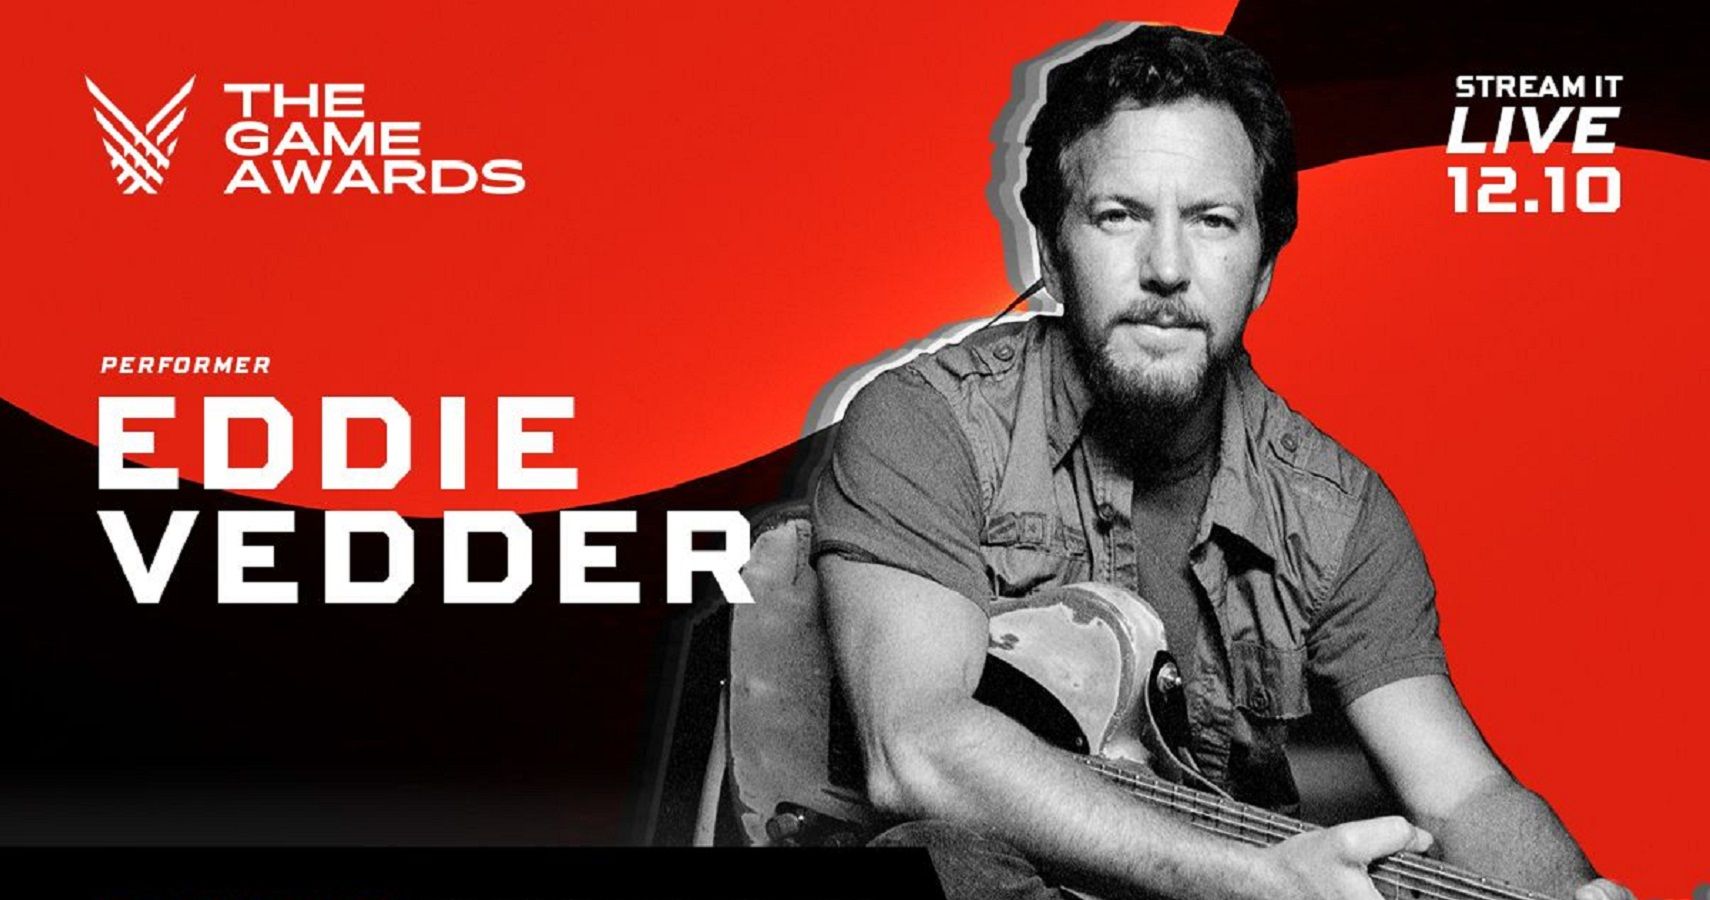 Pearl Jam's Eddie Vedder Will Be Performing At The Game Awards